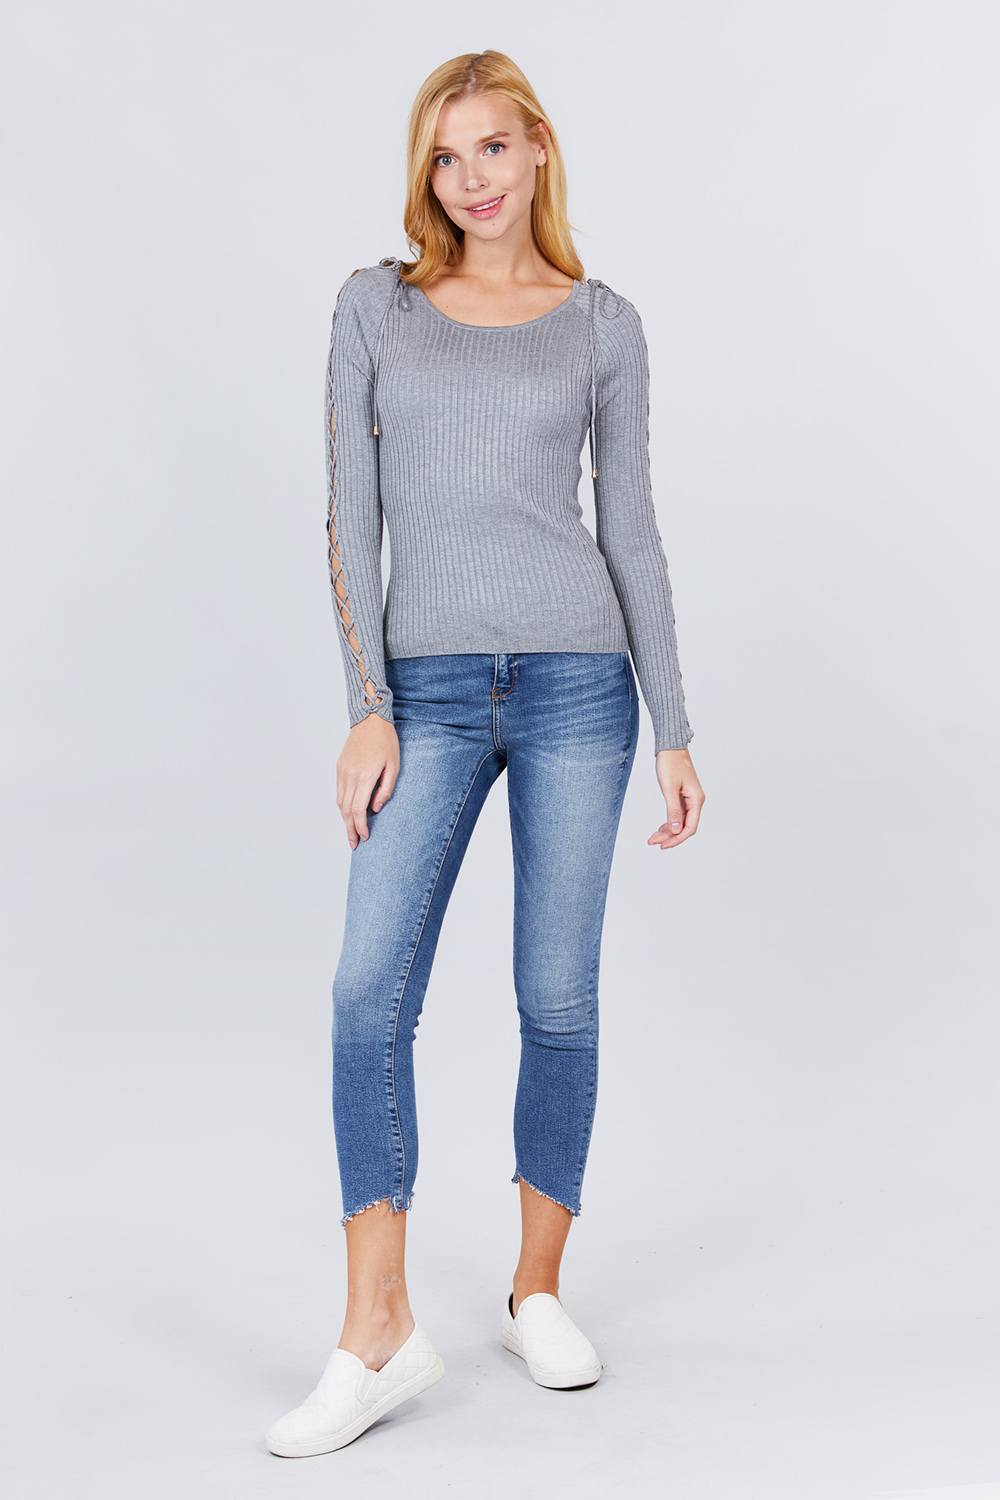 Women's Long Sleeve W/strappy Detail Round Neck Rib Sweater Top